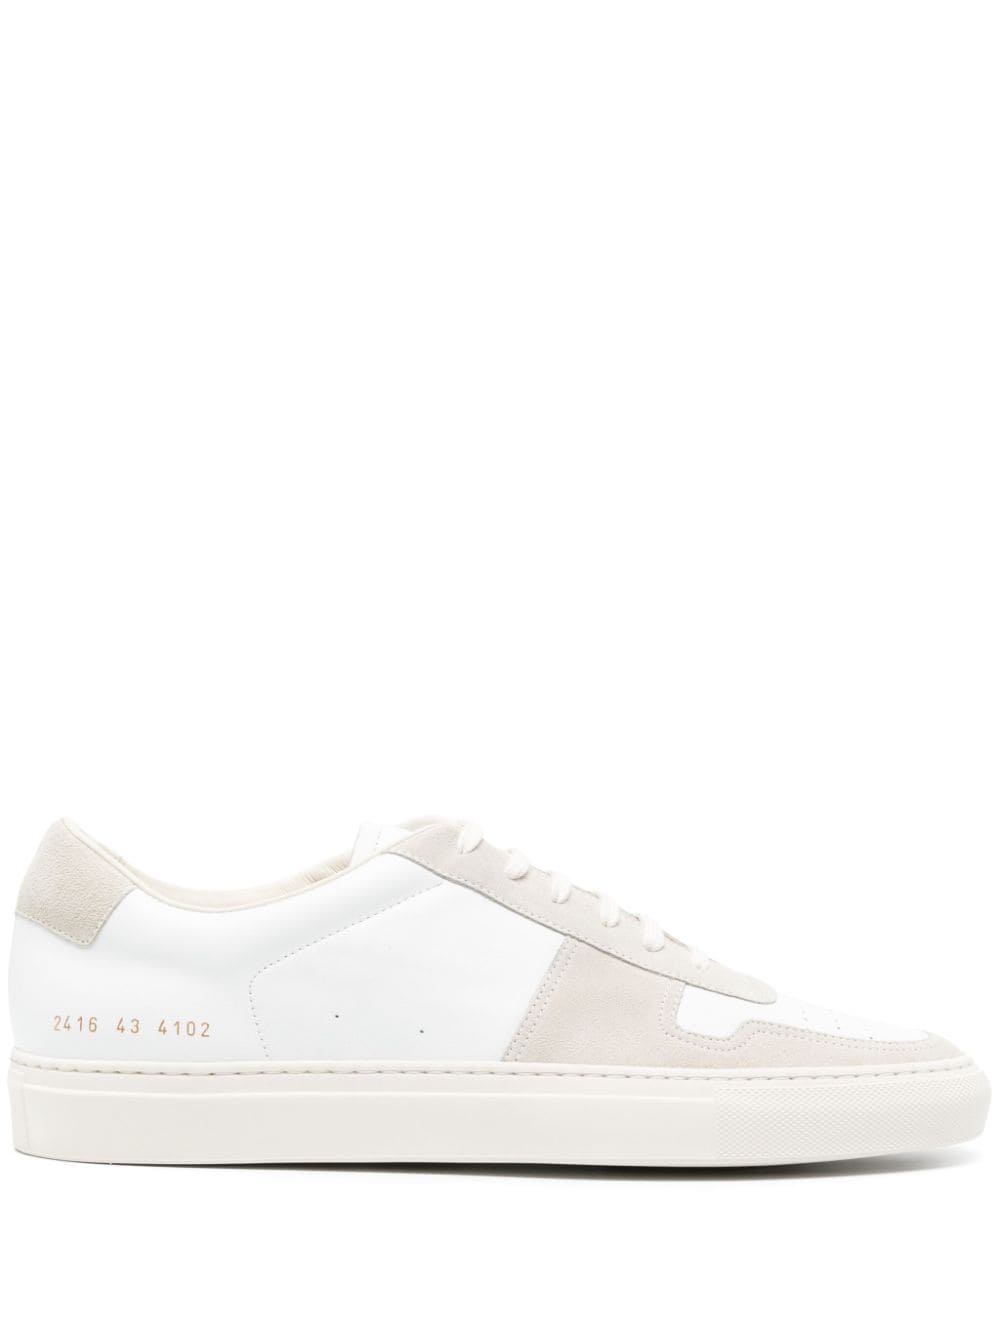 Common Projects BBall panelled sneakers - White von Common Projects